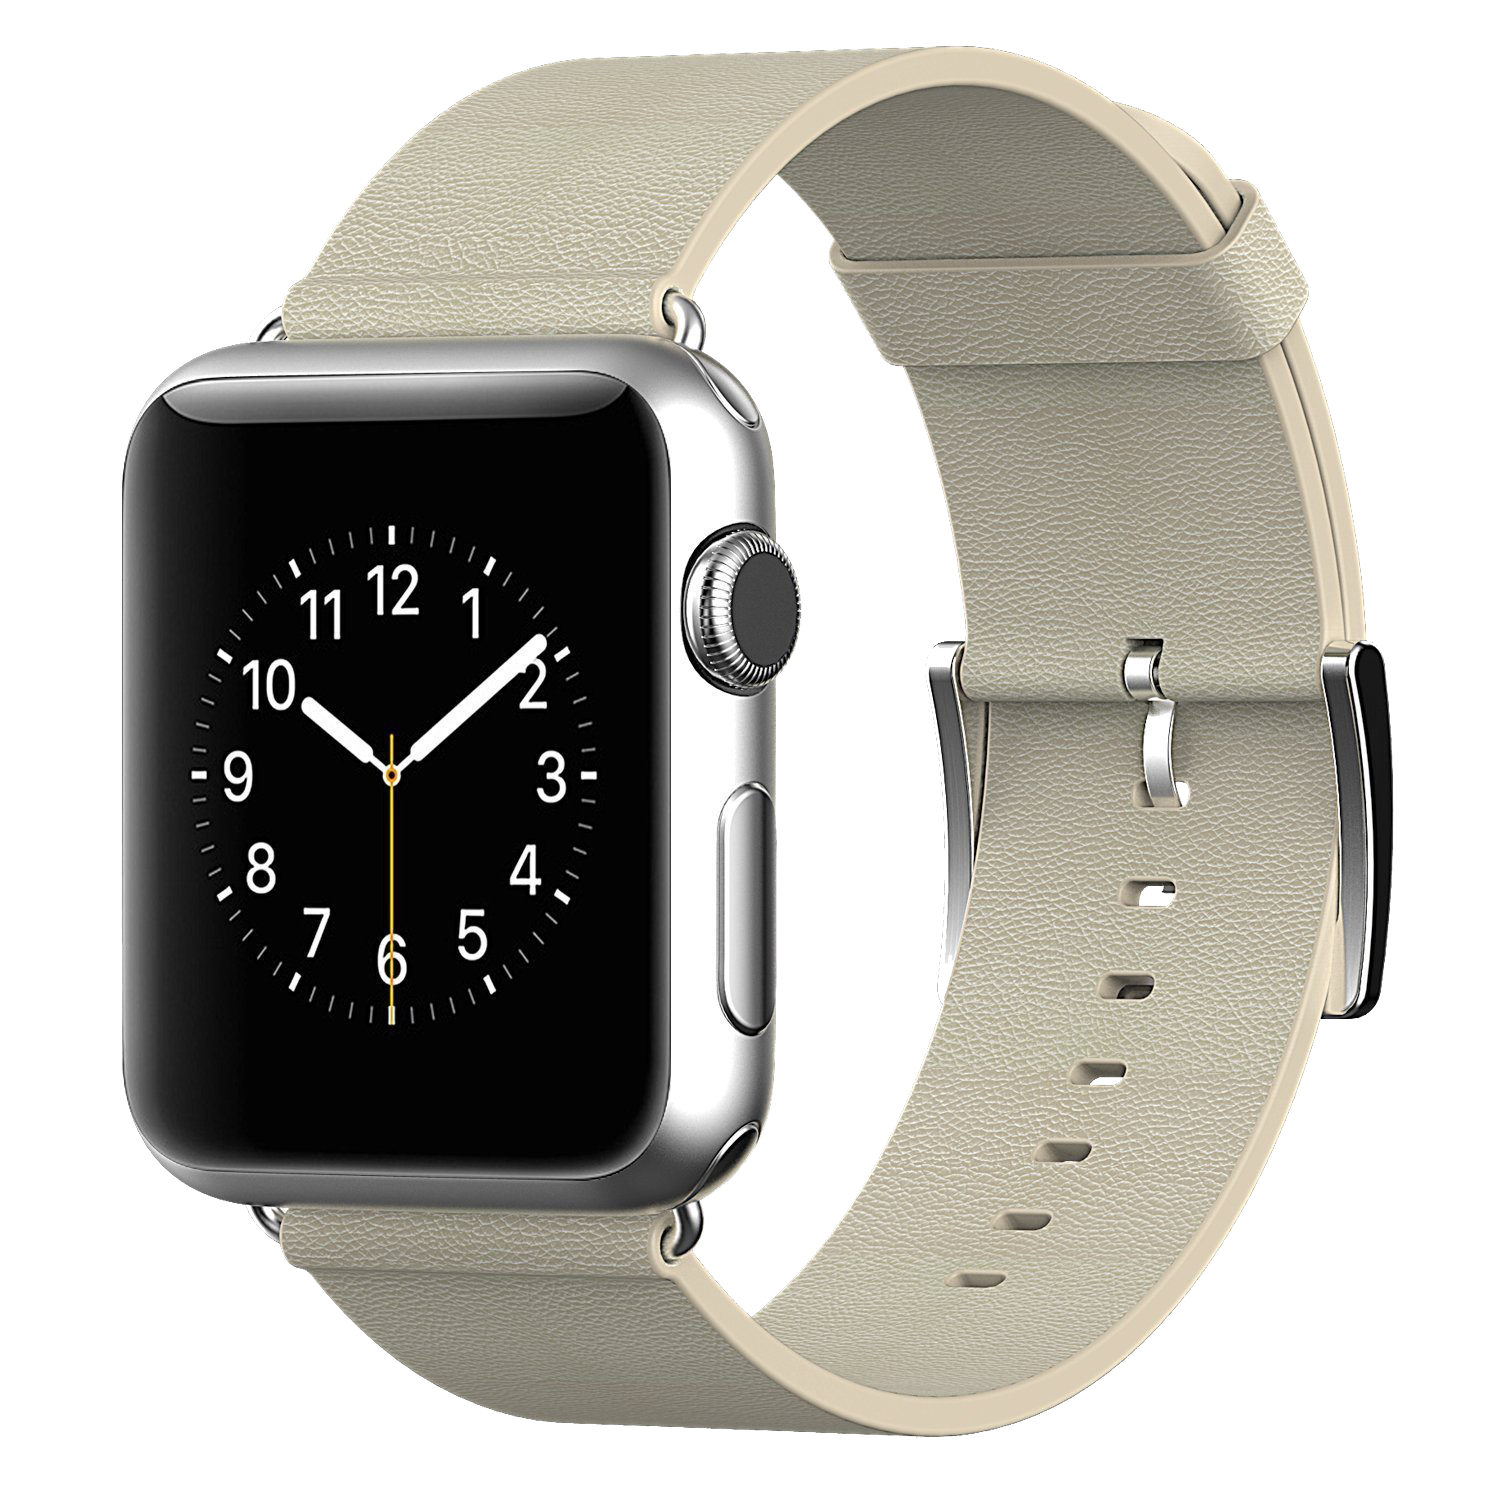 Apple Leather Series Watch Strap Iwatch PNG Image